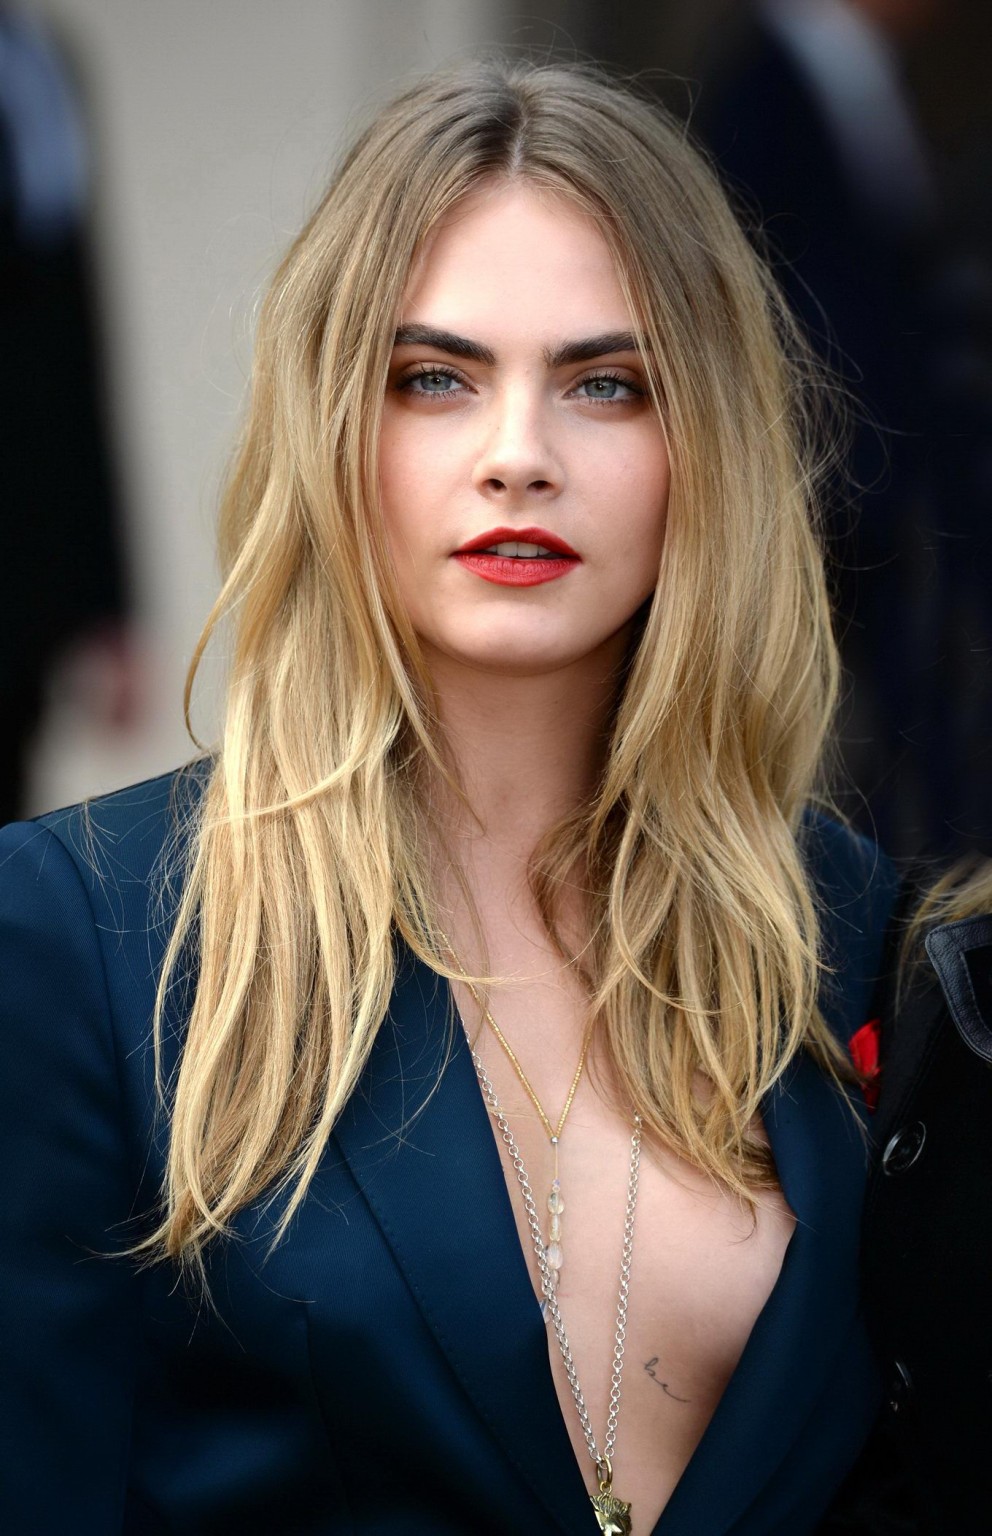 Cara Delevingne braless wearing a wide open jacket at the Burberry Prorsum show  #75185637